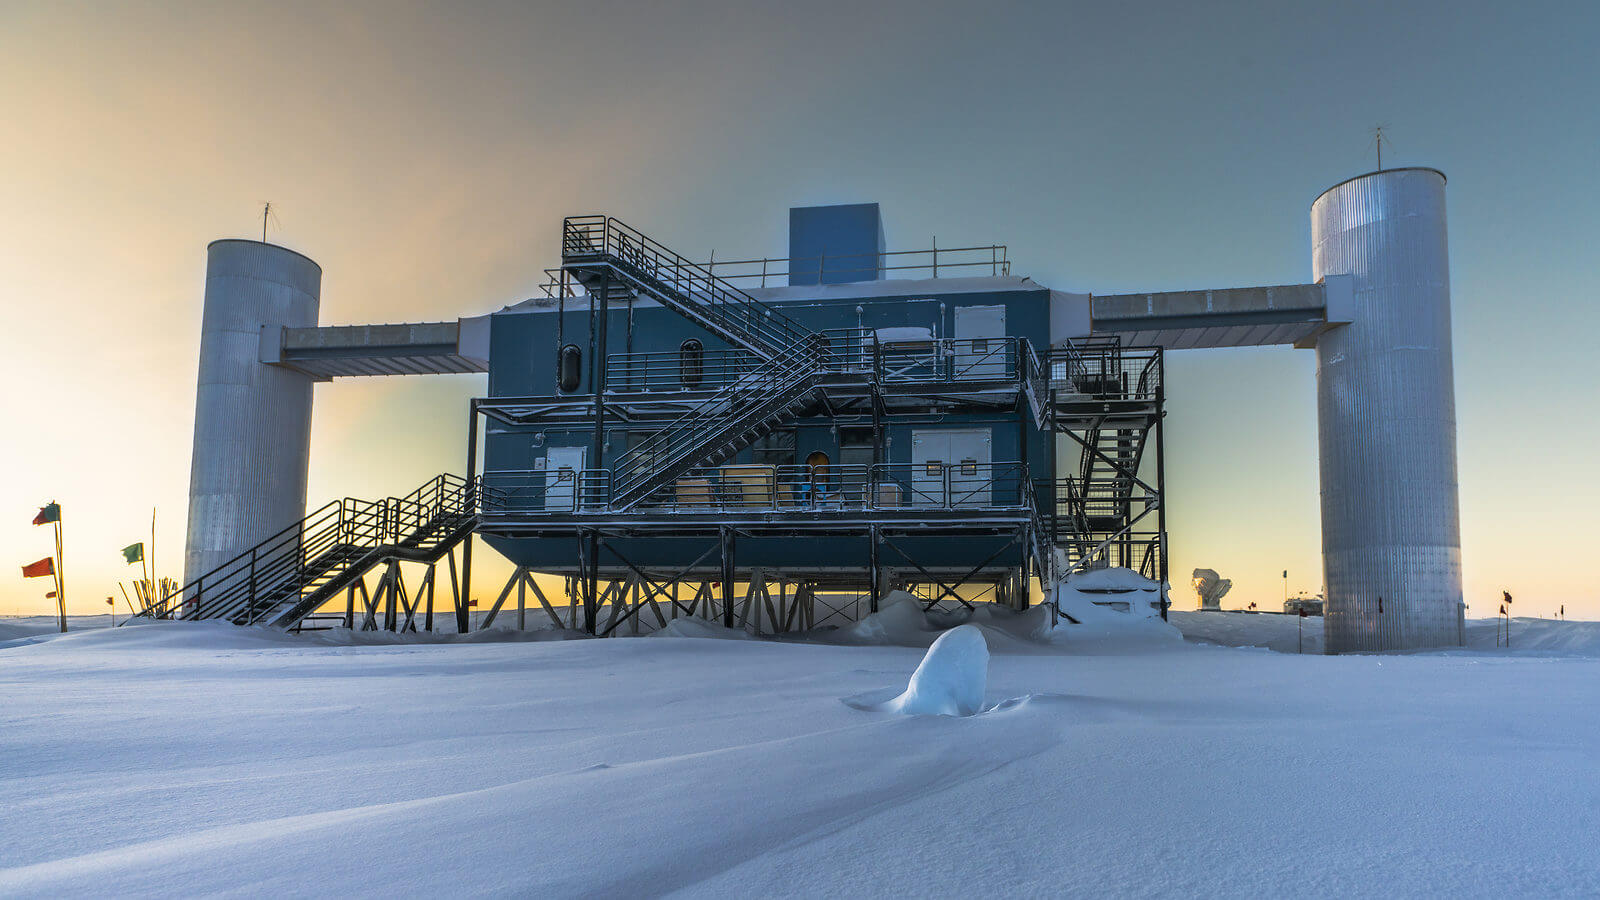 Man Worked In Antarctica Saw Powerful Machines To Contact Alien Crafts In Deep Space